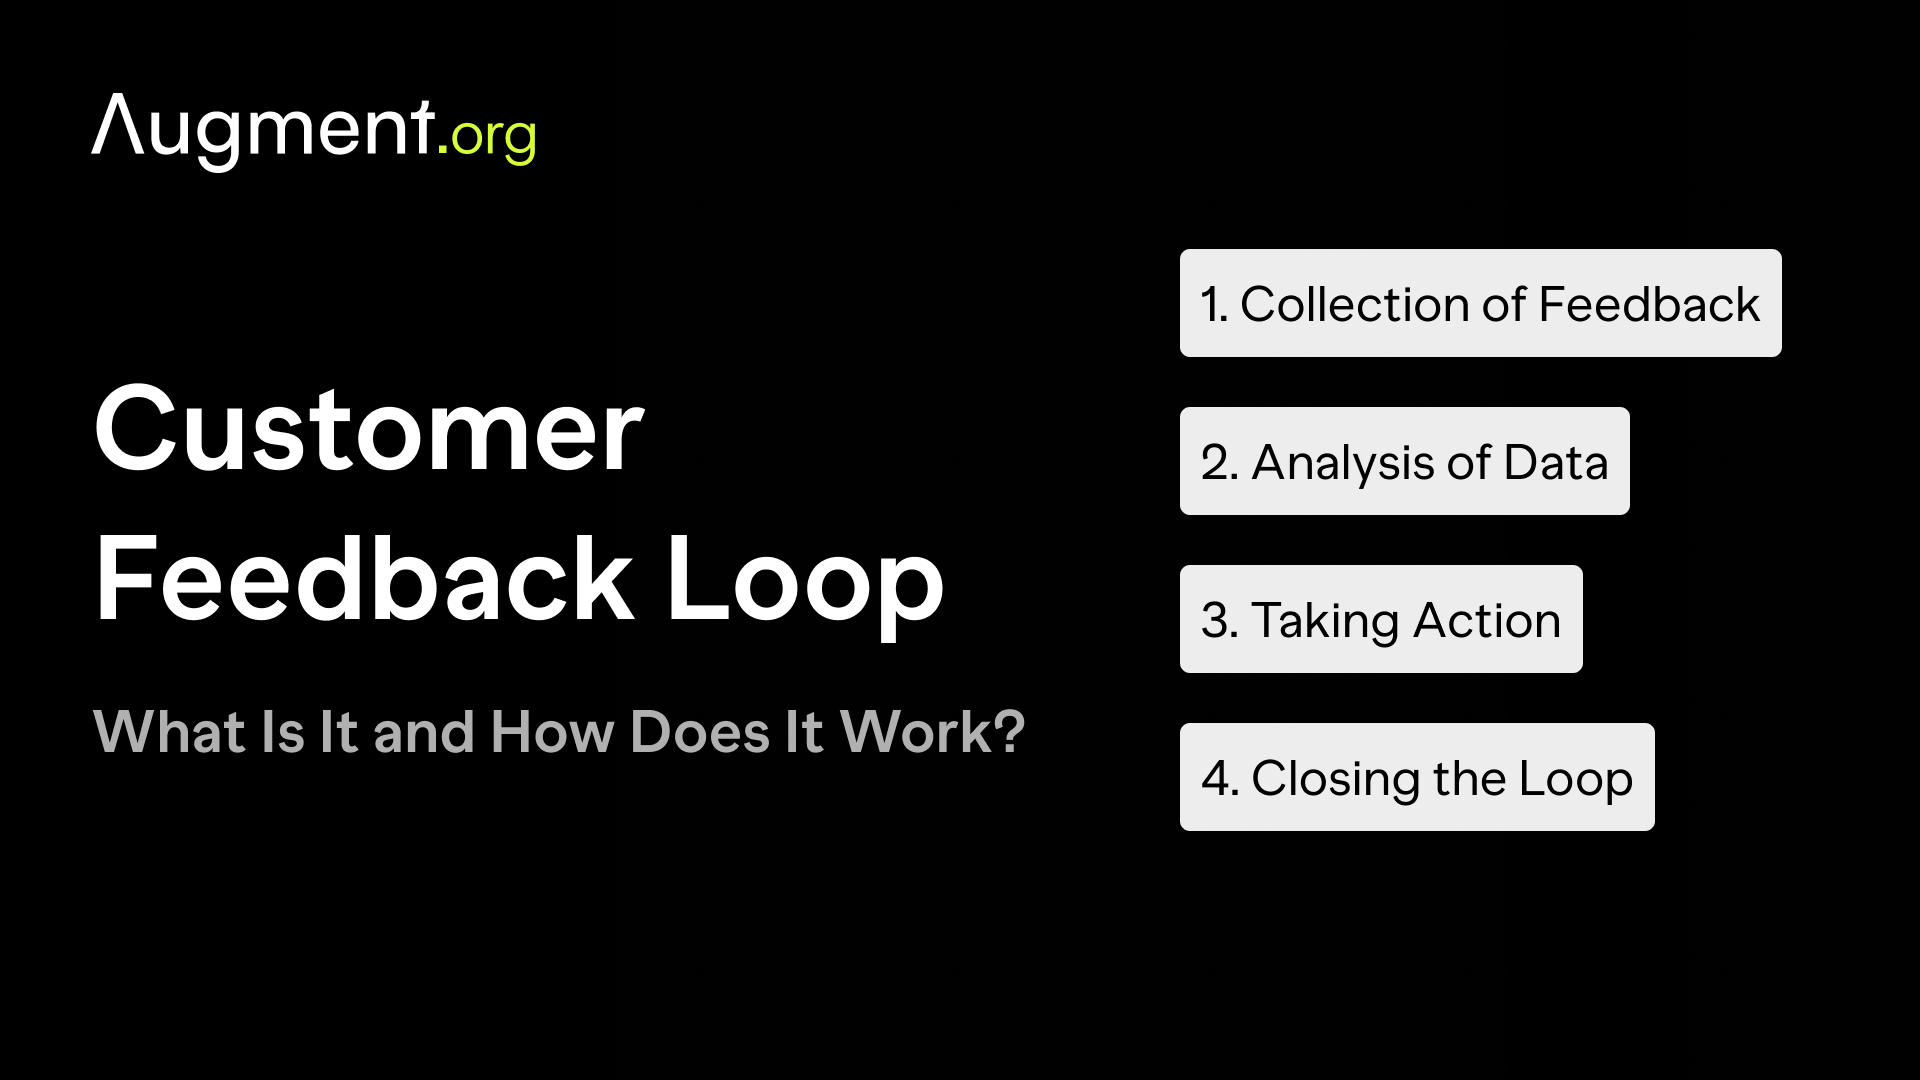 Customer Feedback Loop: What Is It and How Does It Work?